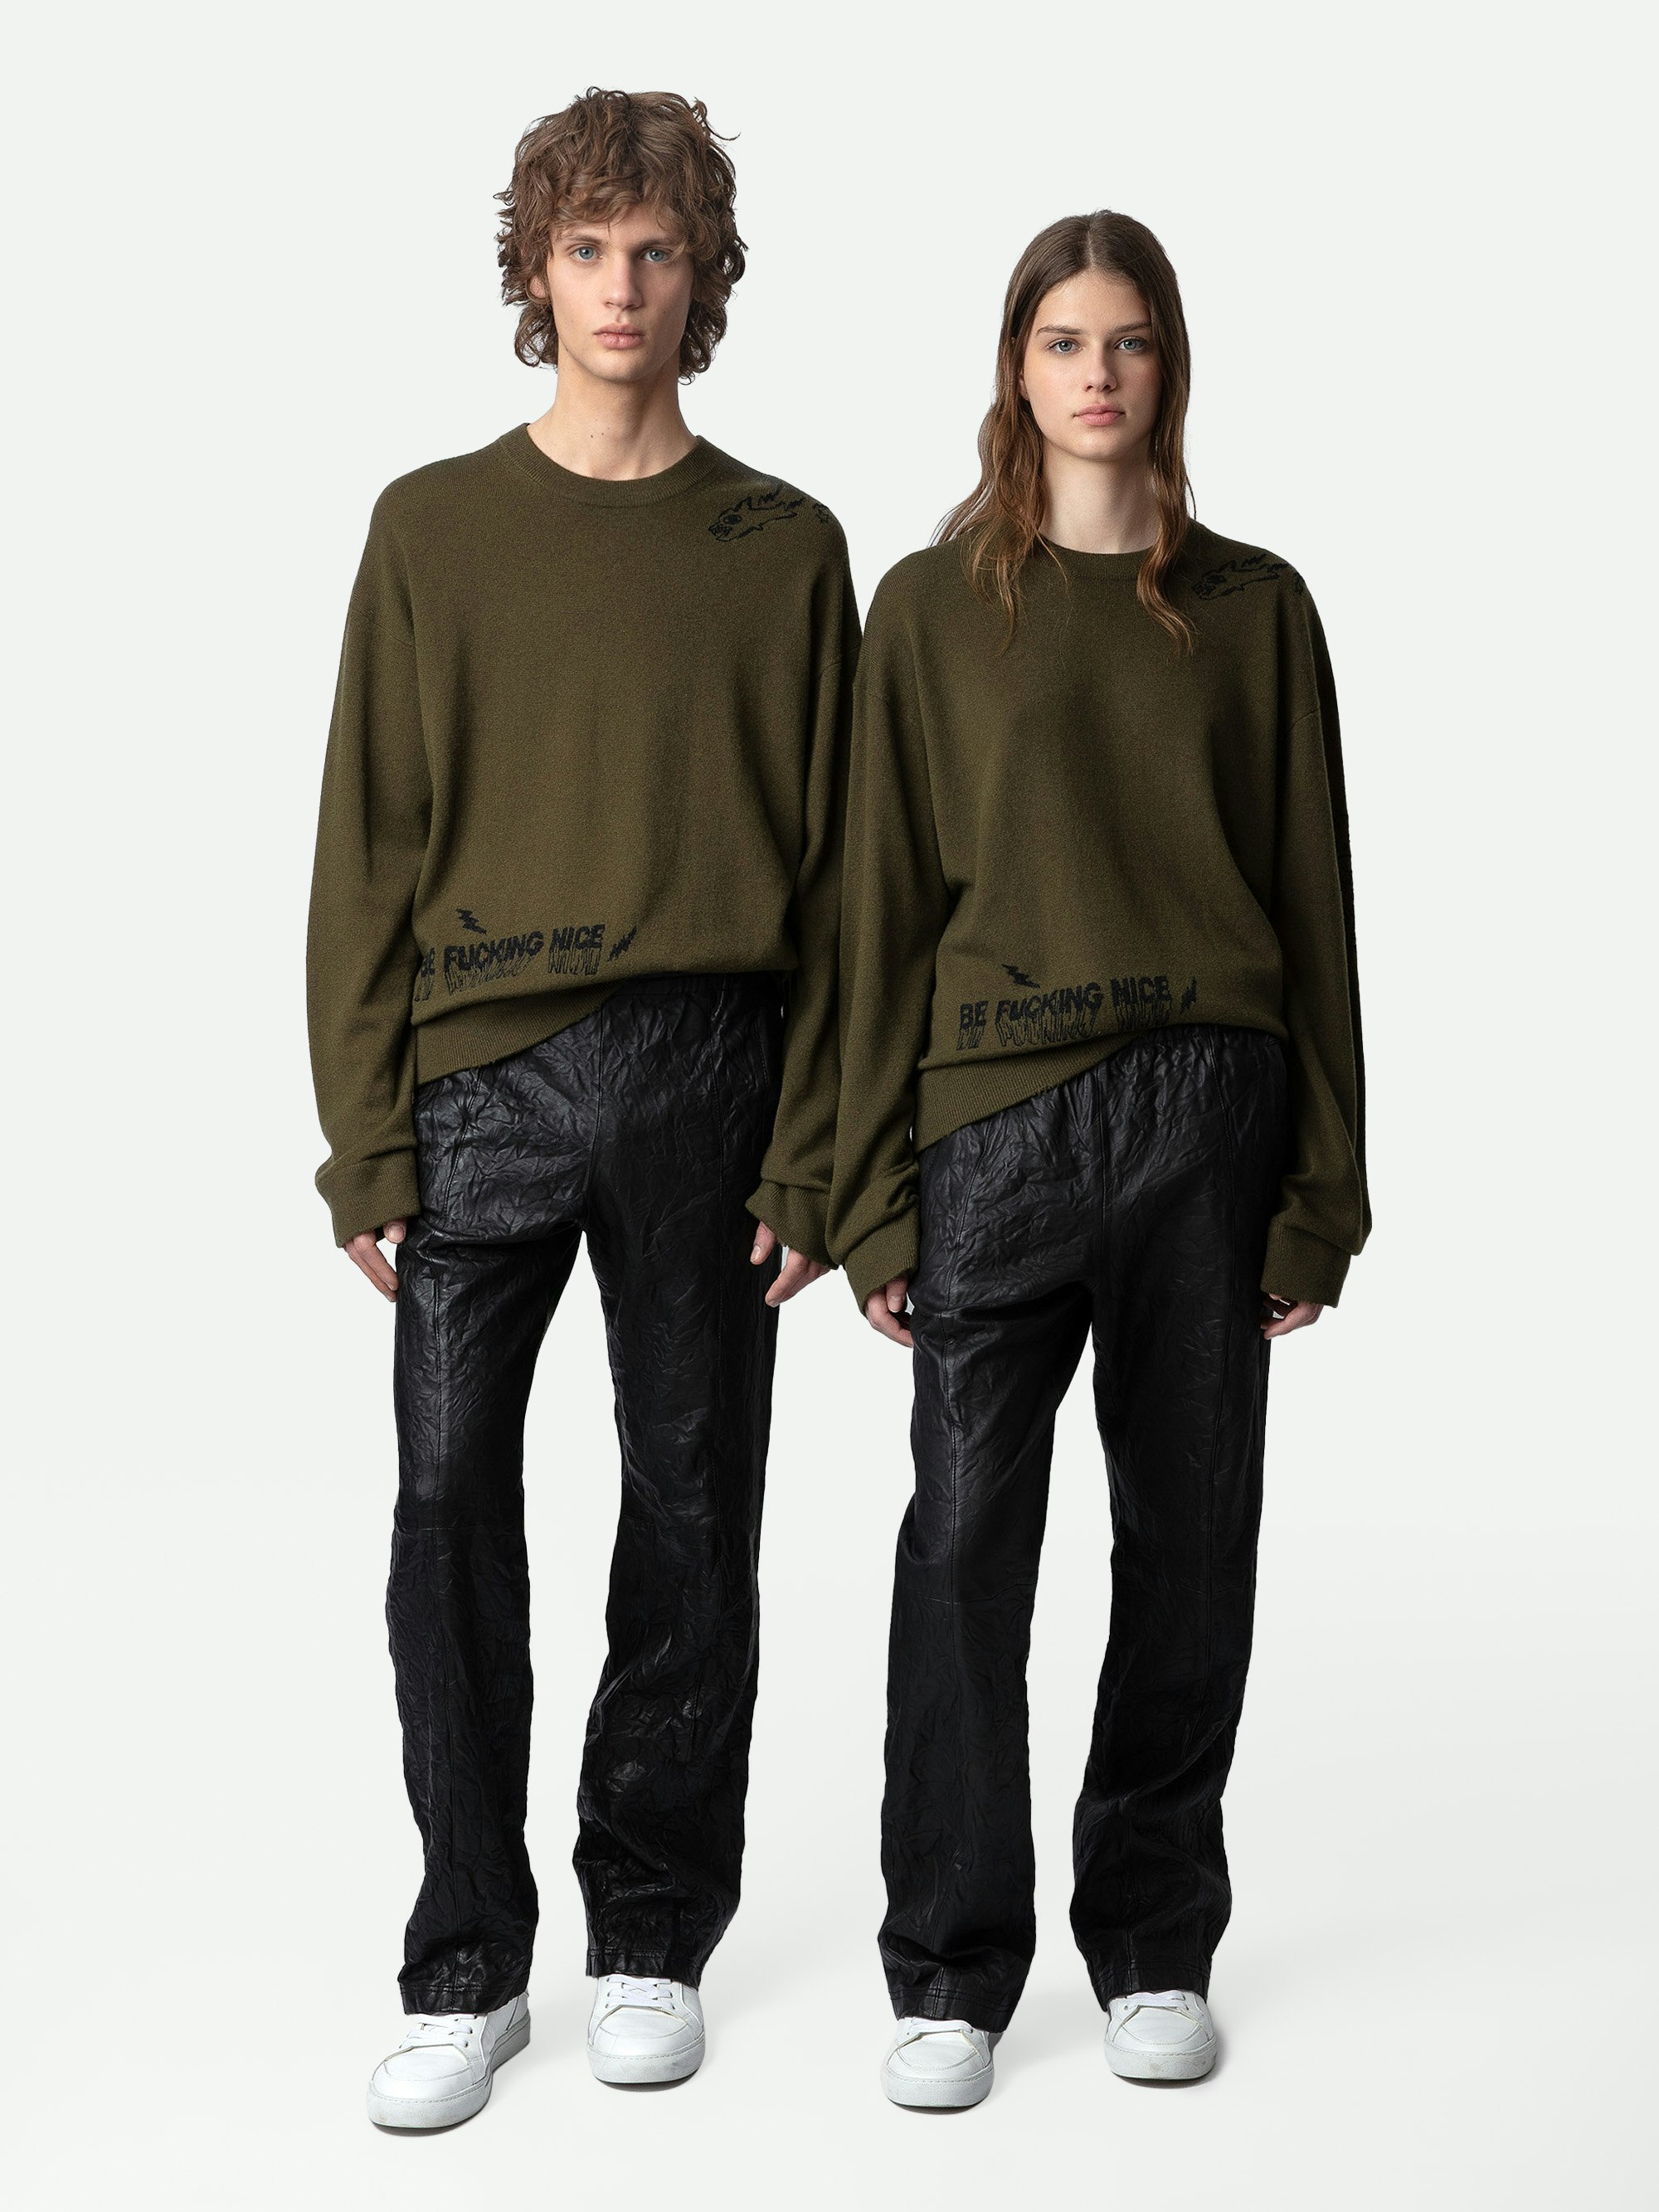 Marko Jumper - Khaki wool and cashmere long-sleeved jumper with graffiti motifs and slogans.